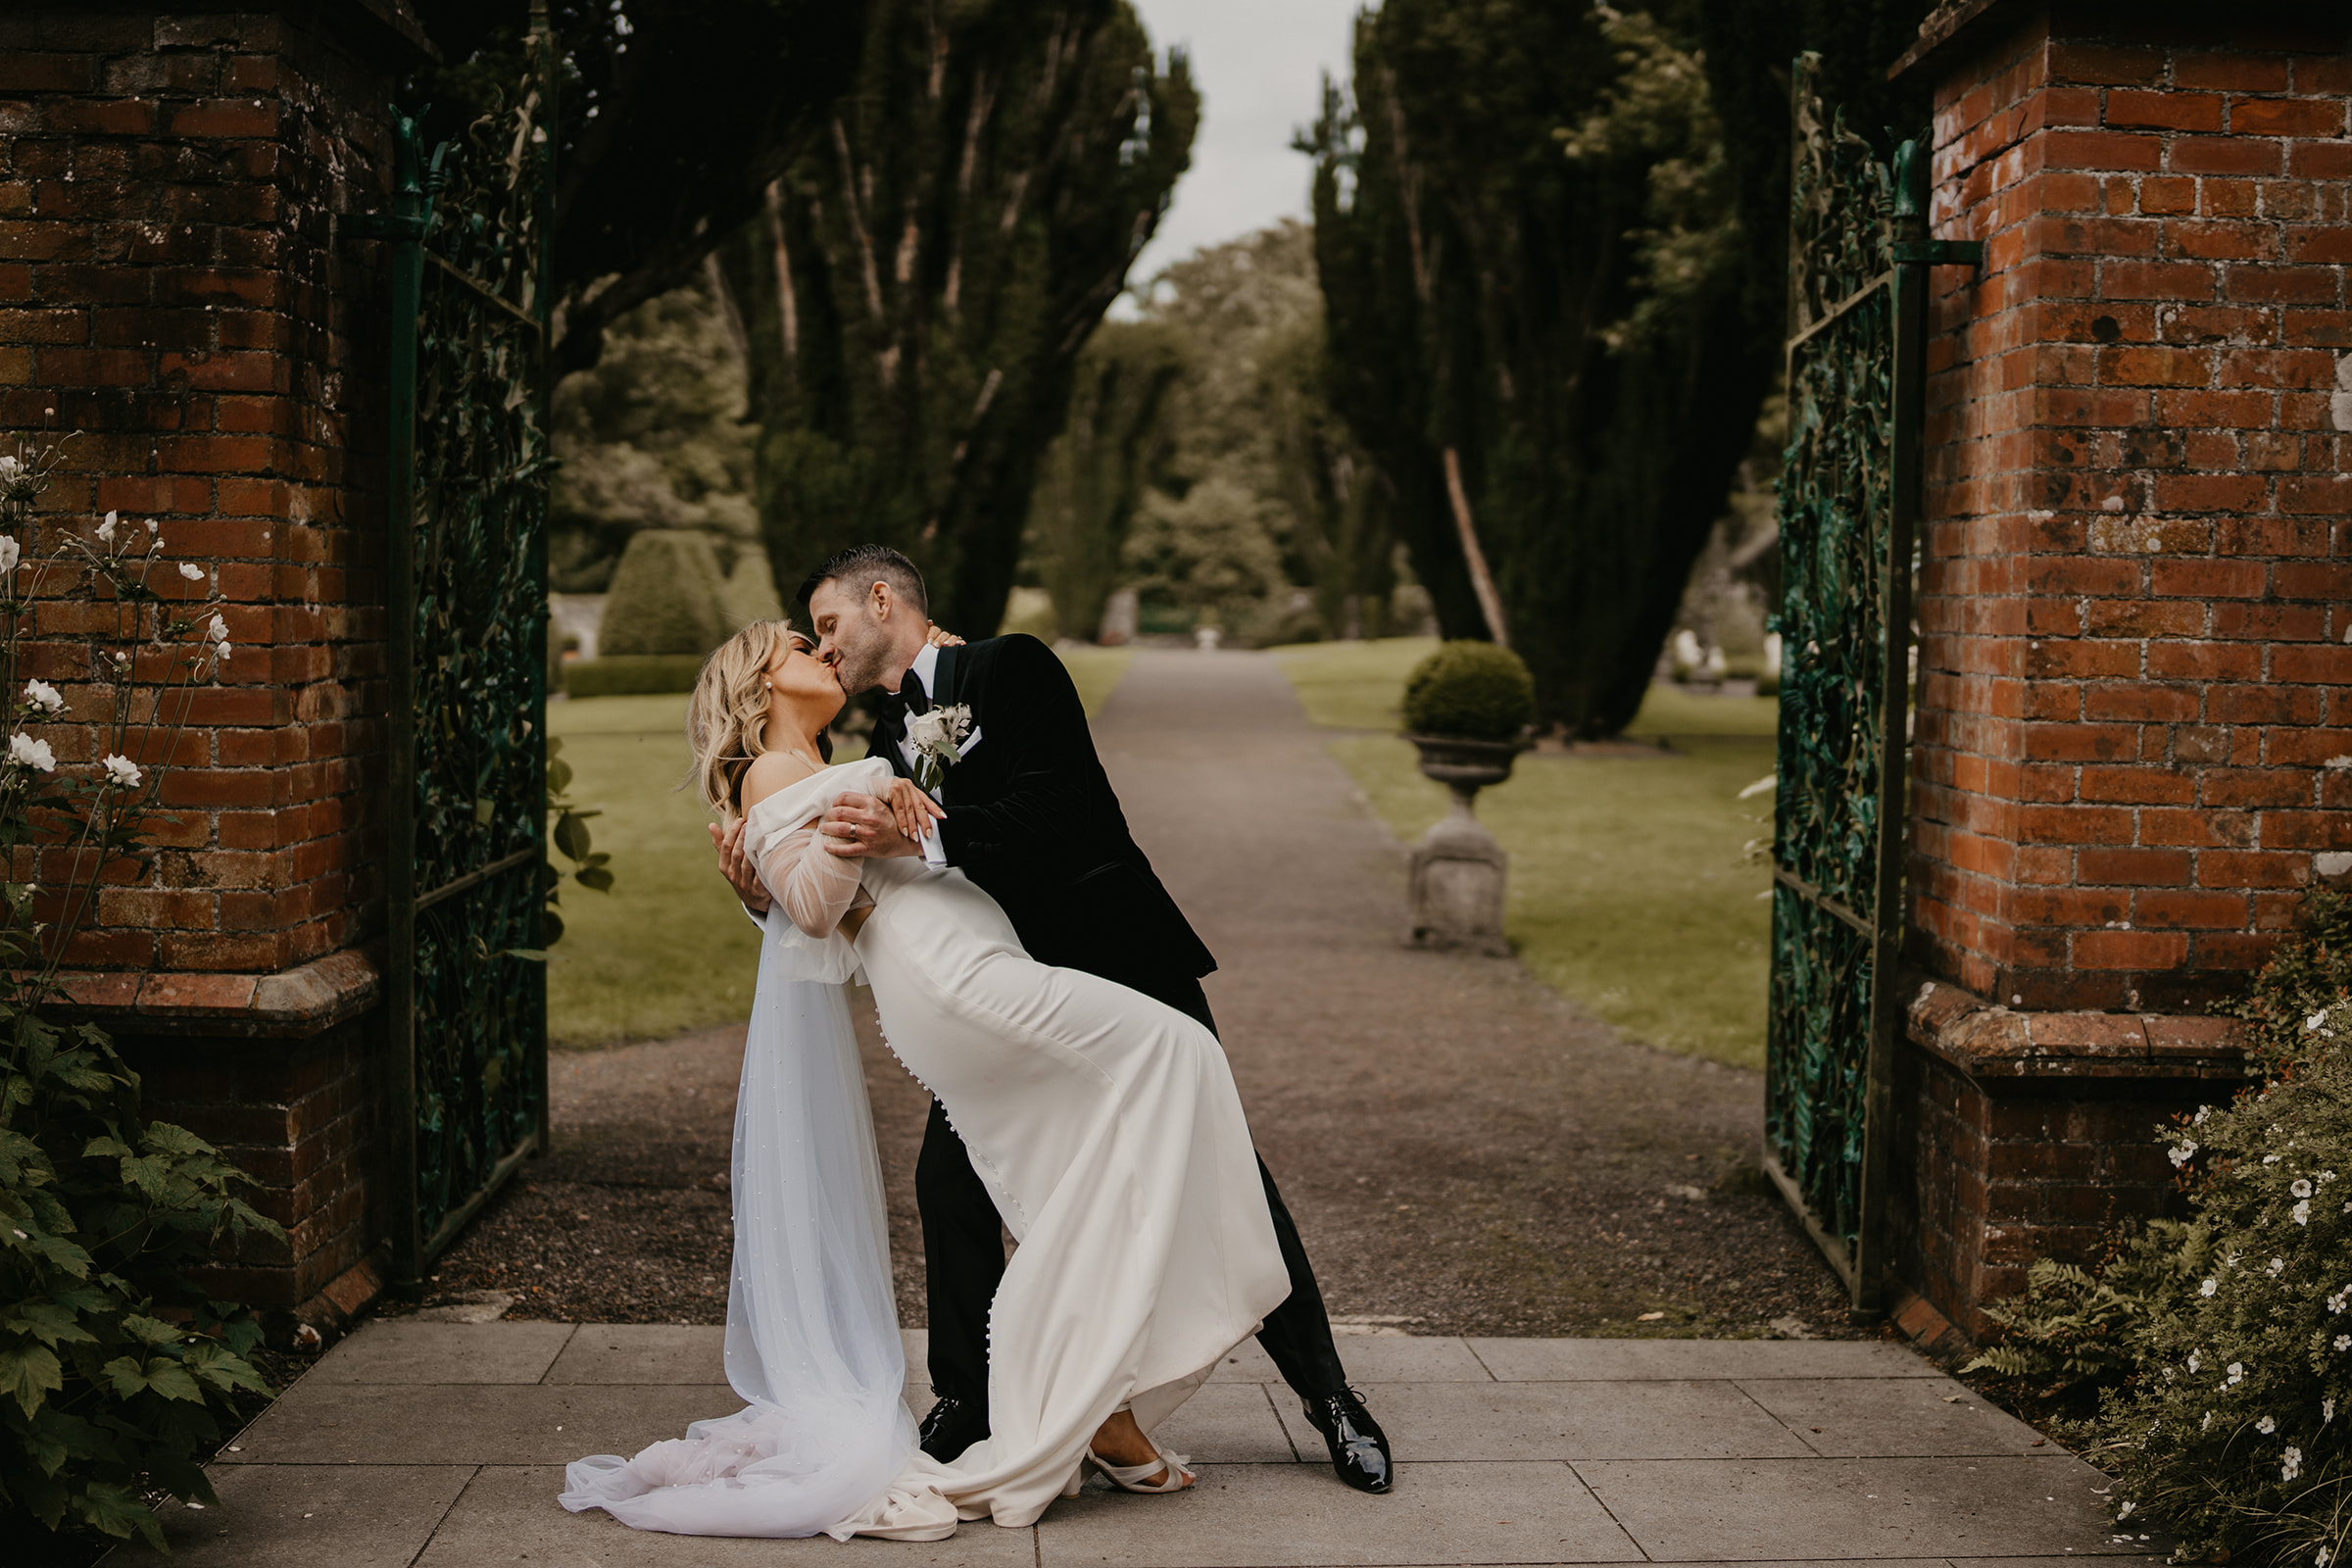 Kelly-Marie & Michael practice their first dance in the beautiful gardens of Tankardstown House